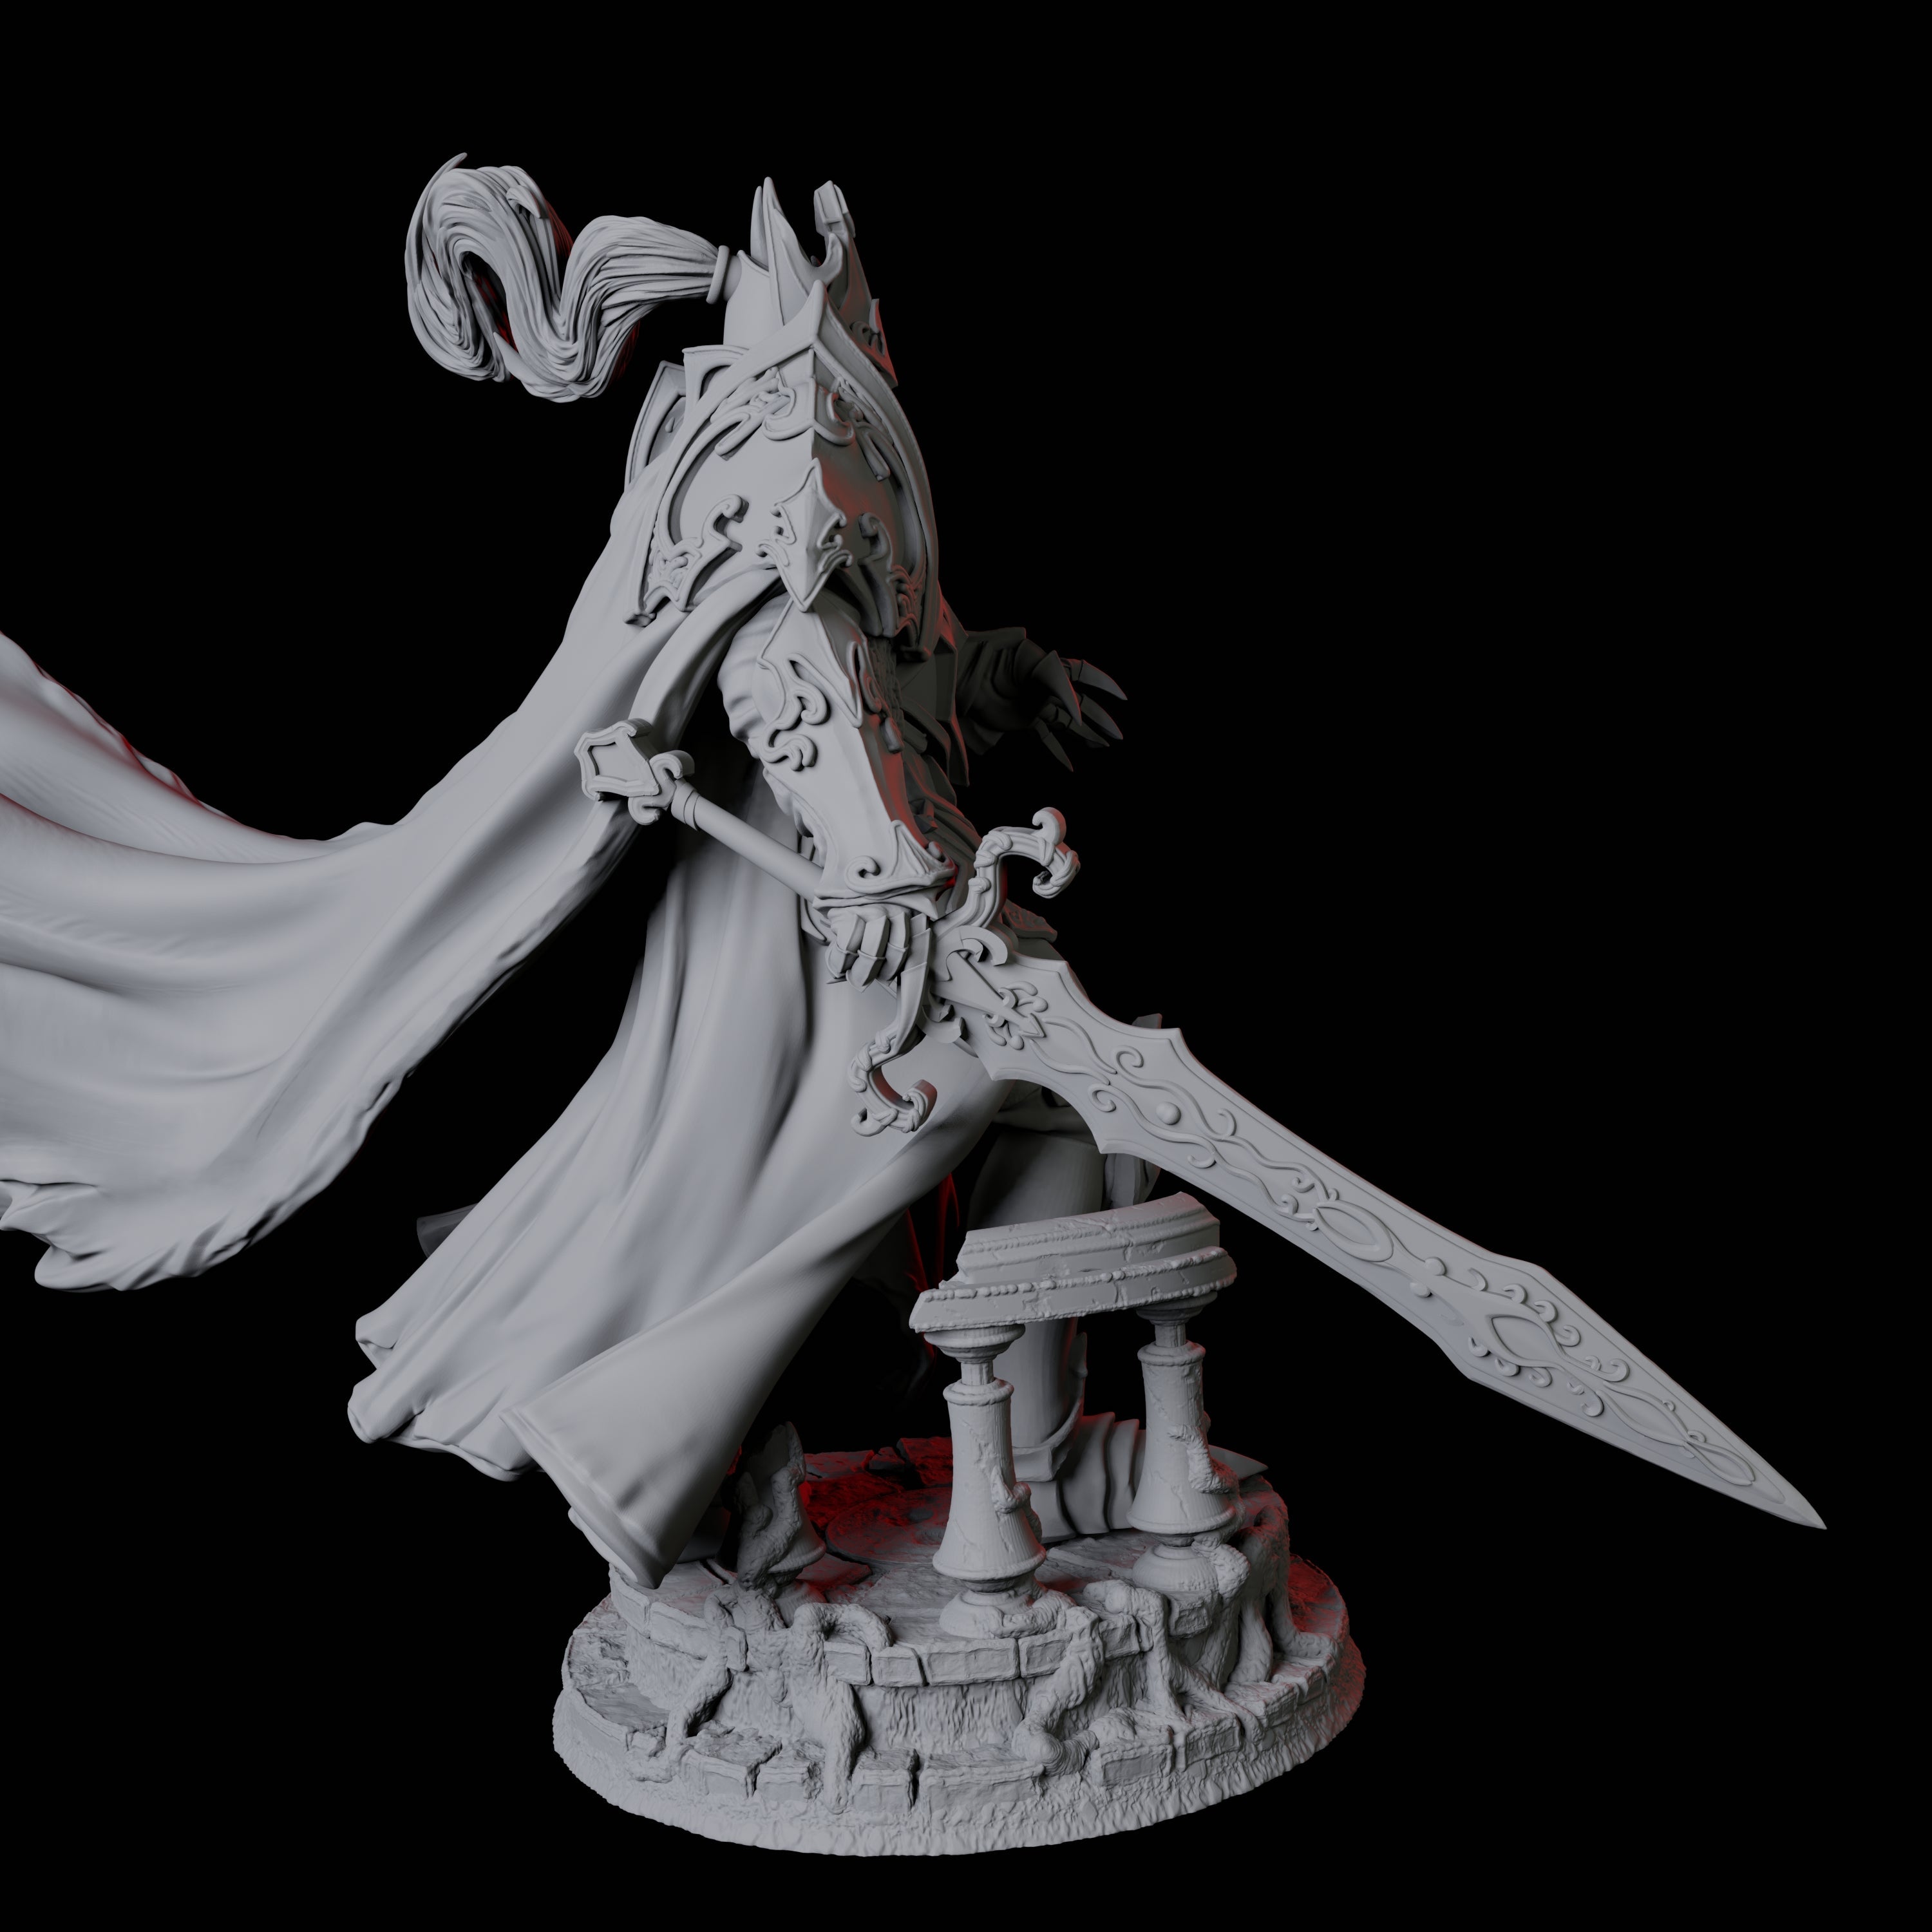 Striding Heavily Armoured Paladin Miniature for Dungeons and Dragons, Pathfinder or other TTRPGs